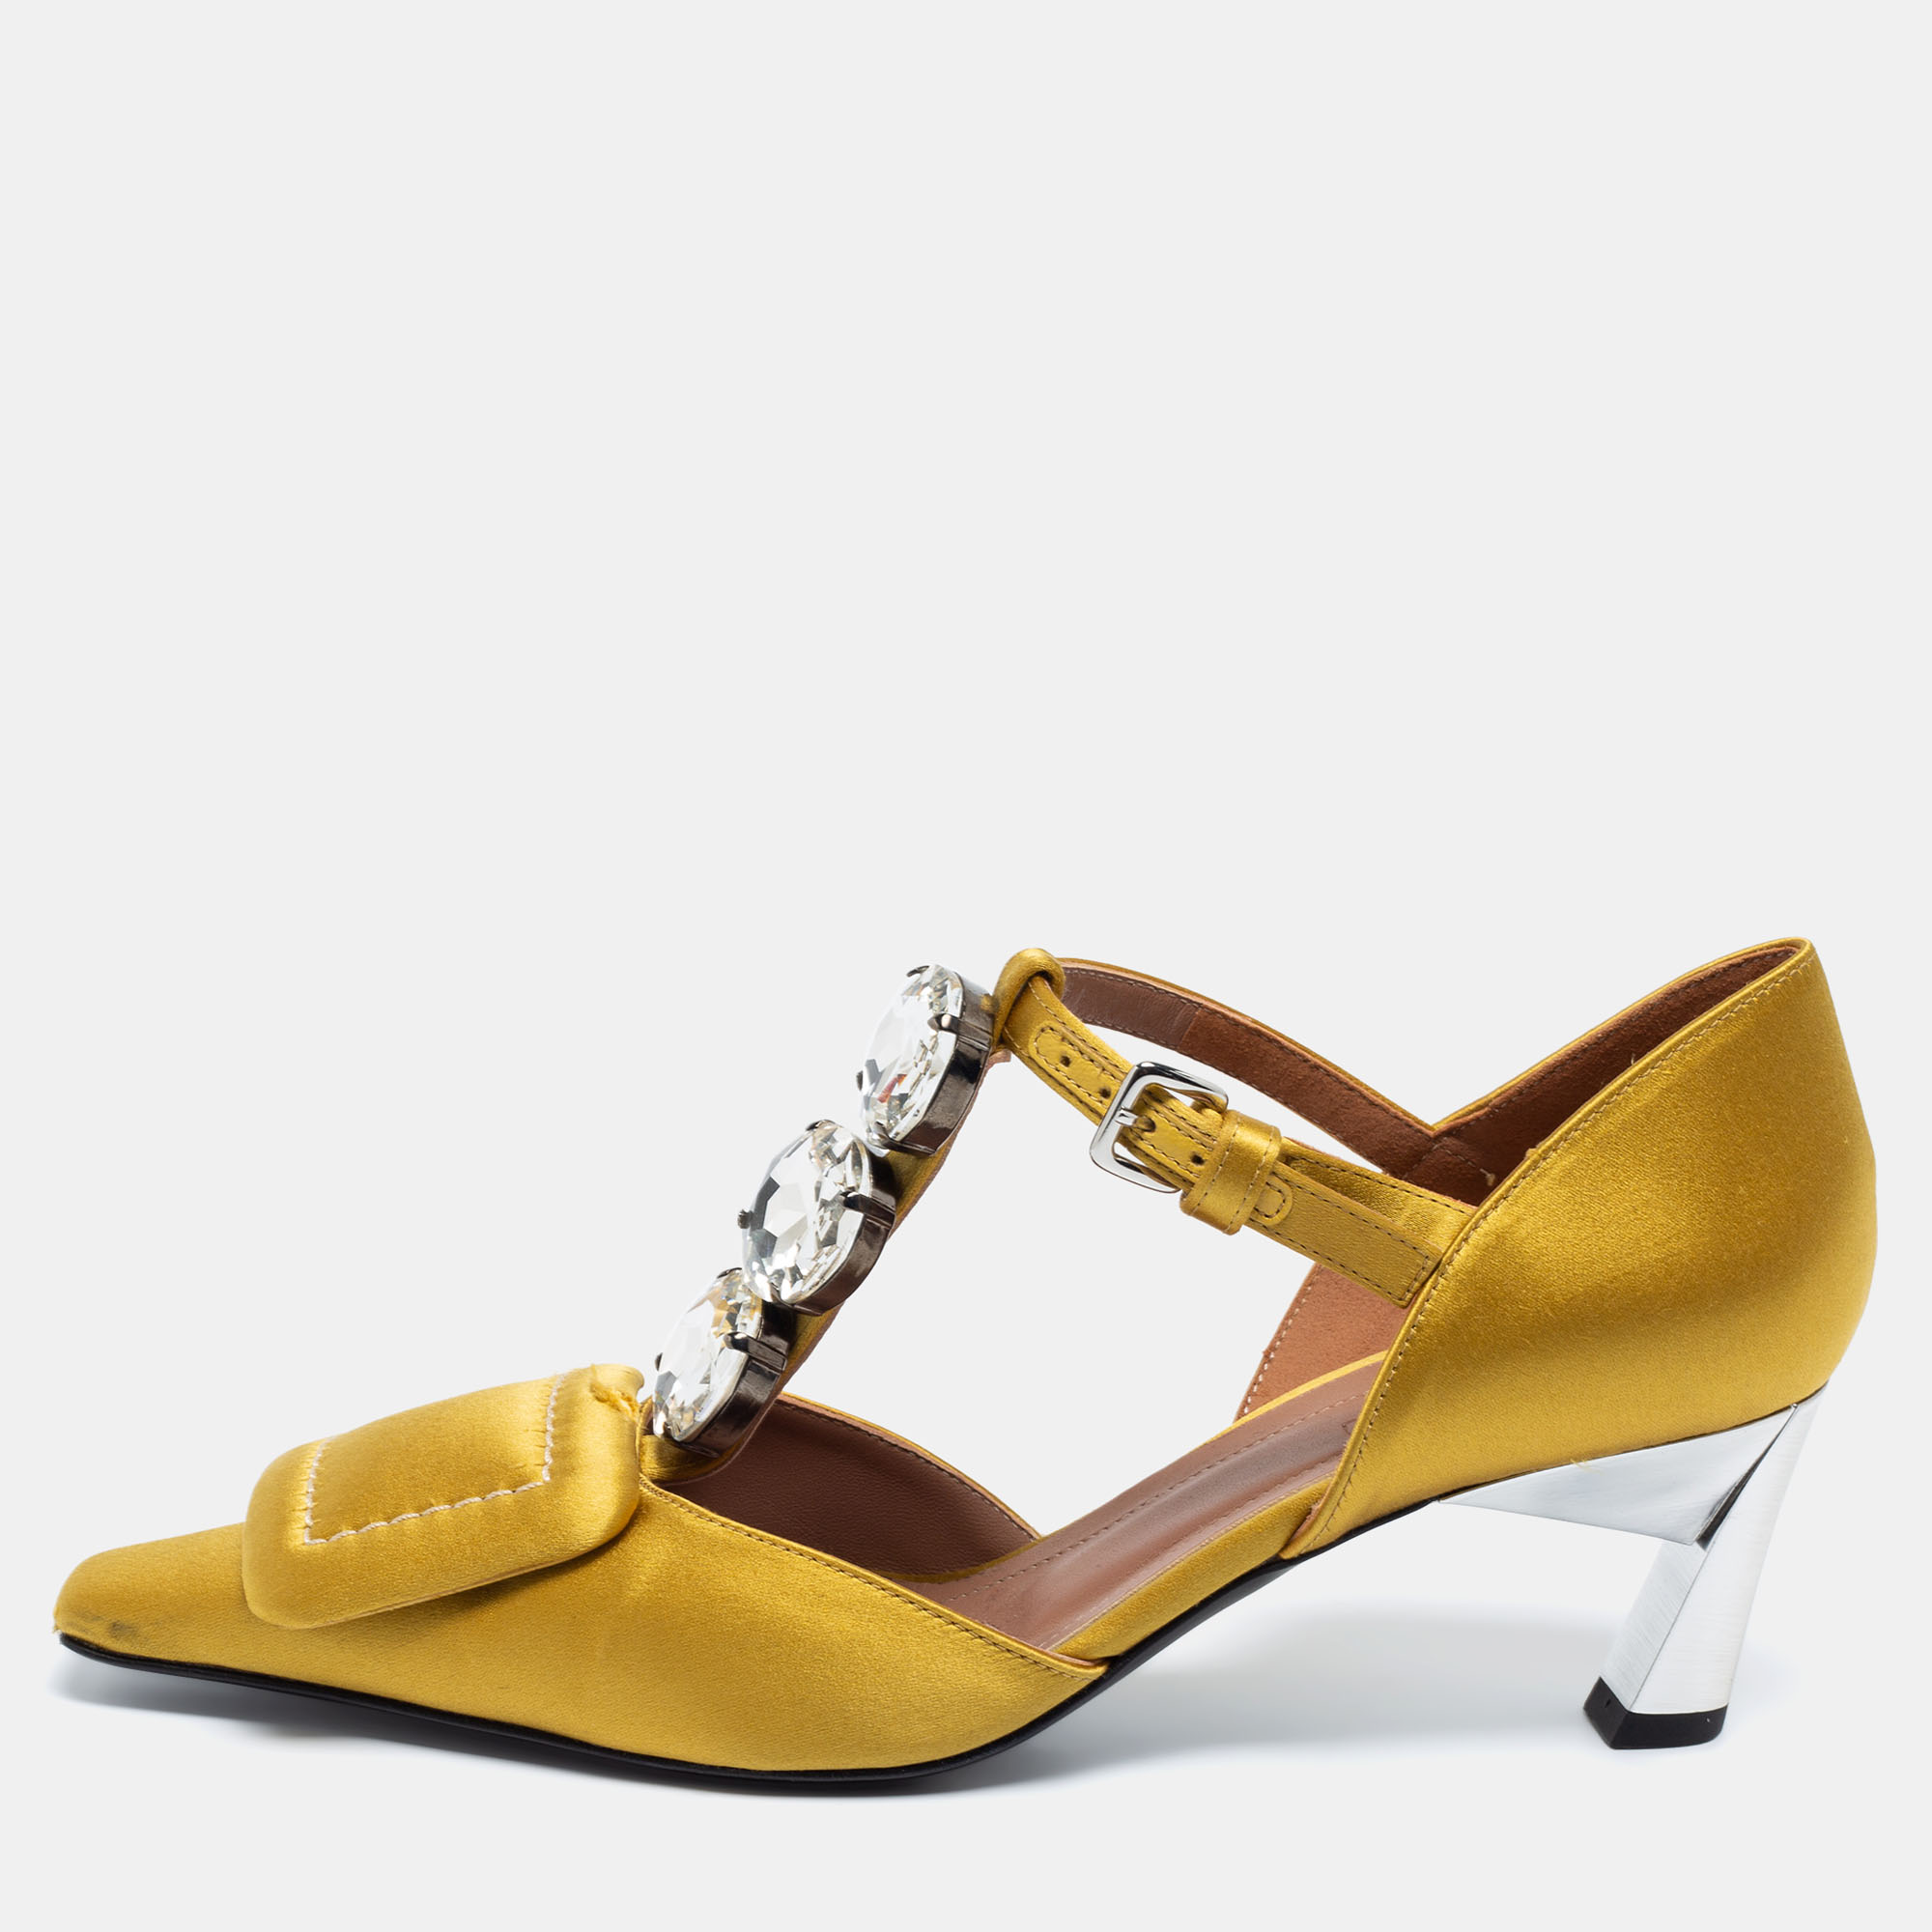 Pre-owned Marni Yellow Satin Crystal Embellished T-bar Pumps Size 36